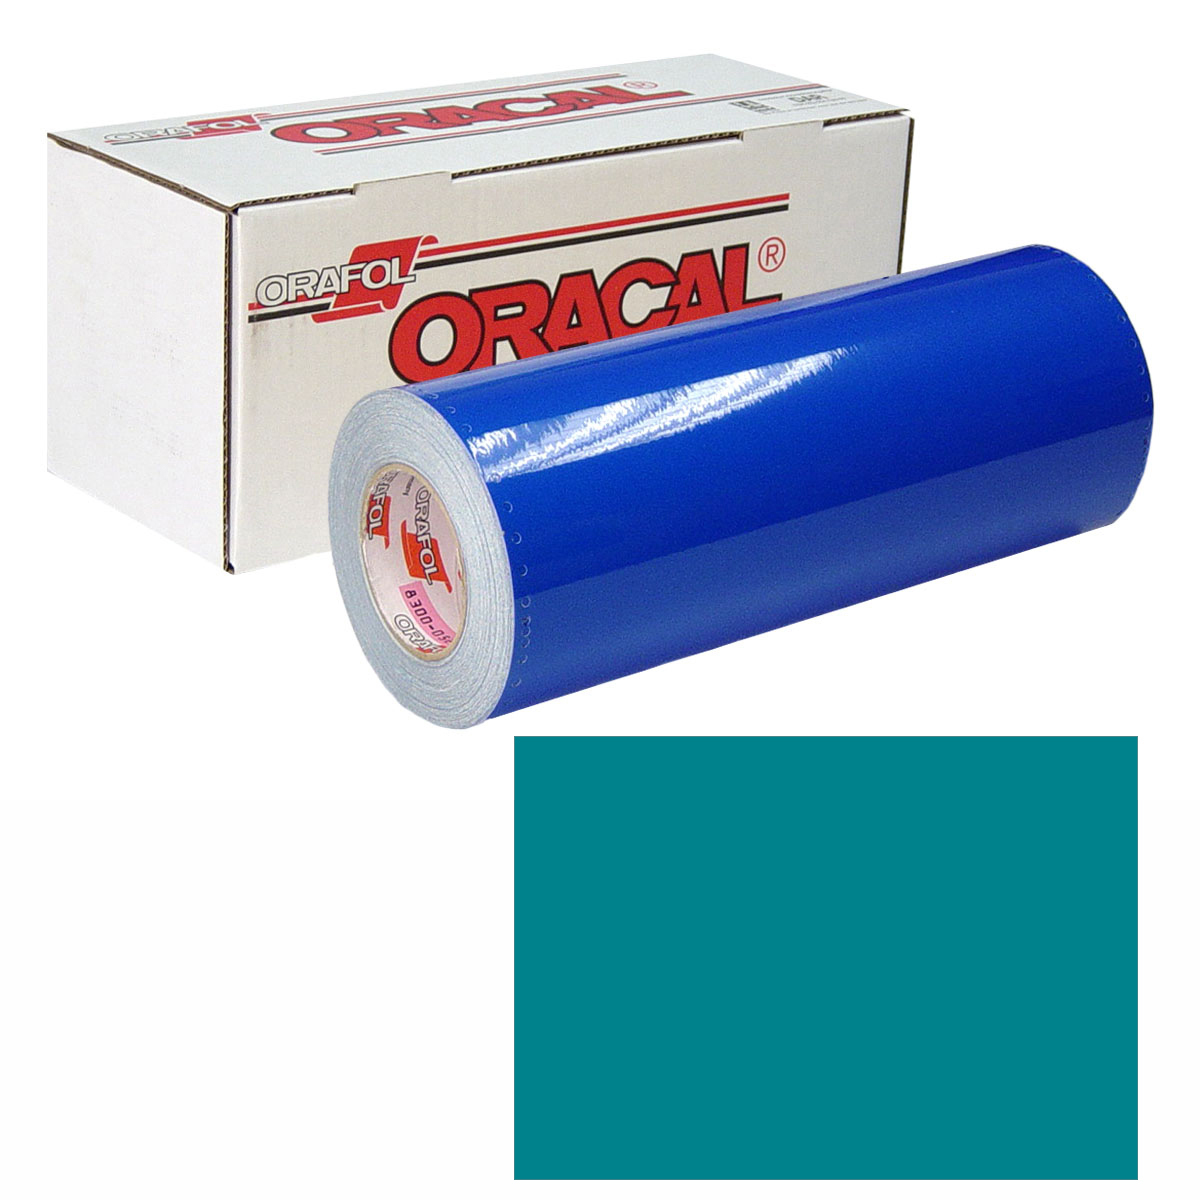 ORACAL 631 30in X 50yd 066 Turquoise Blue